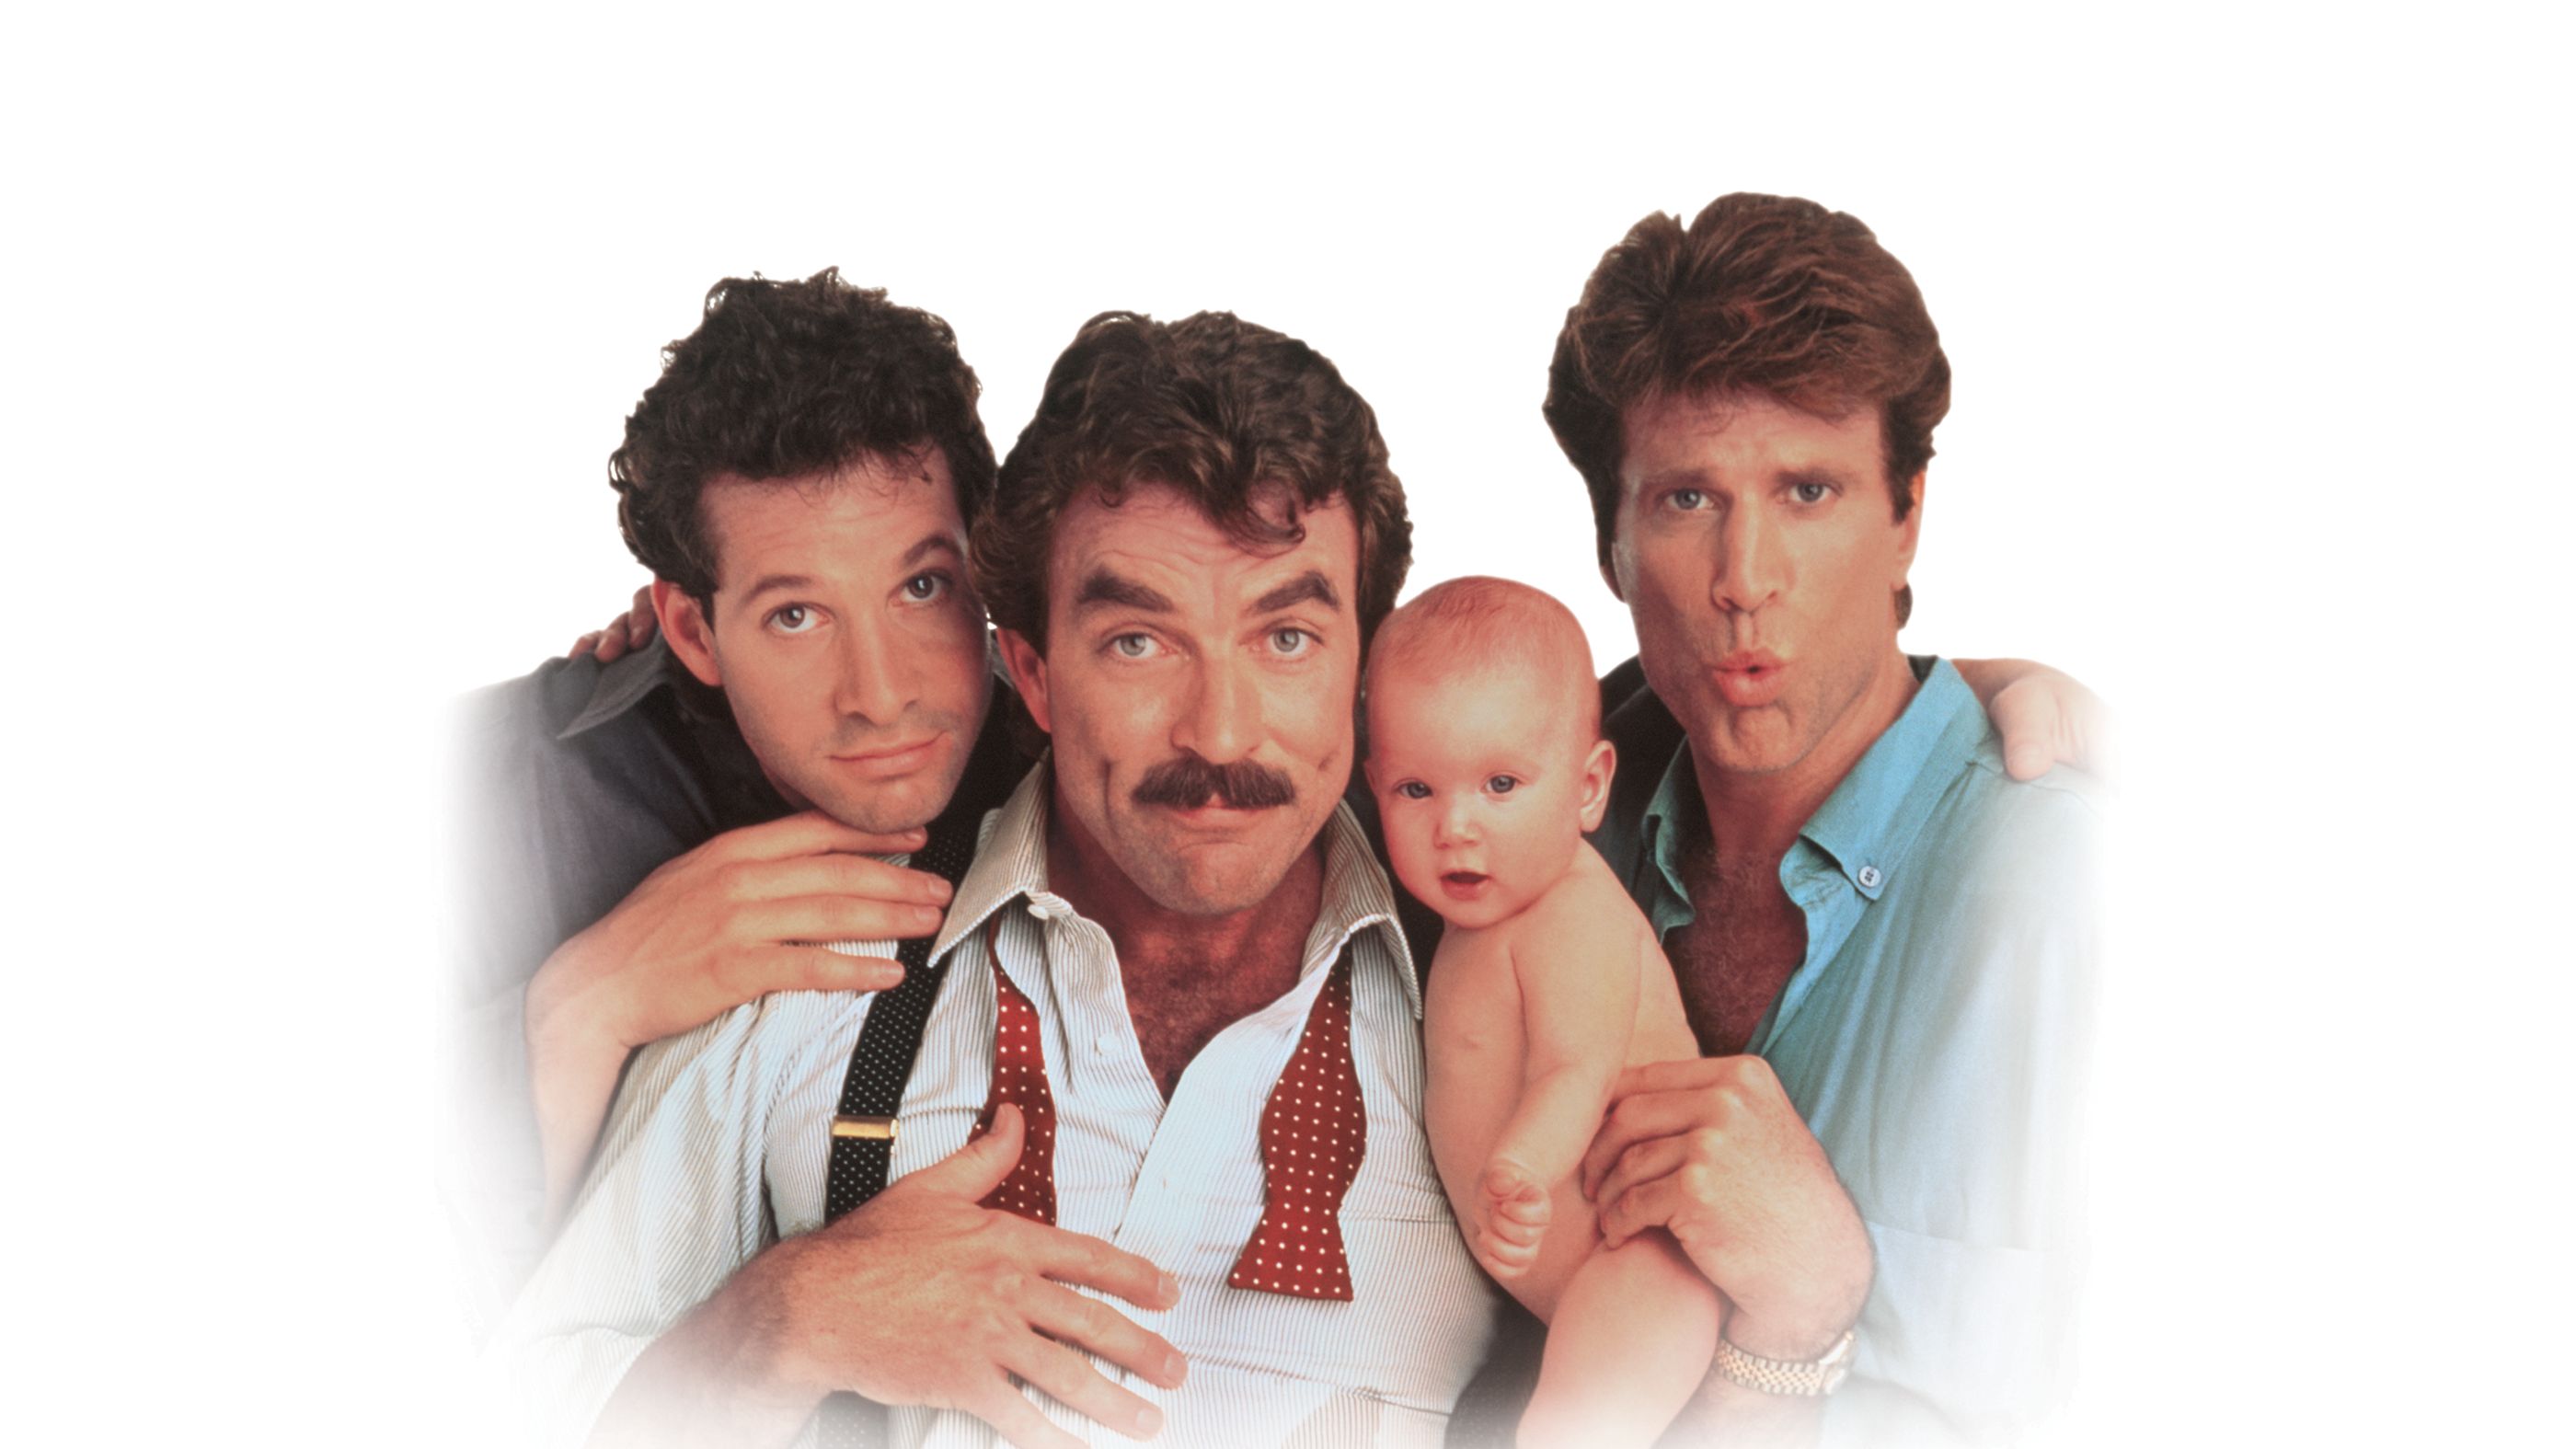 Three Men and a Baby - Wikipedia